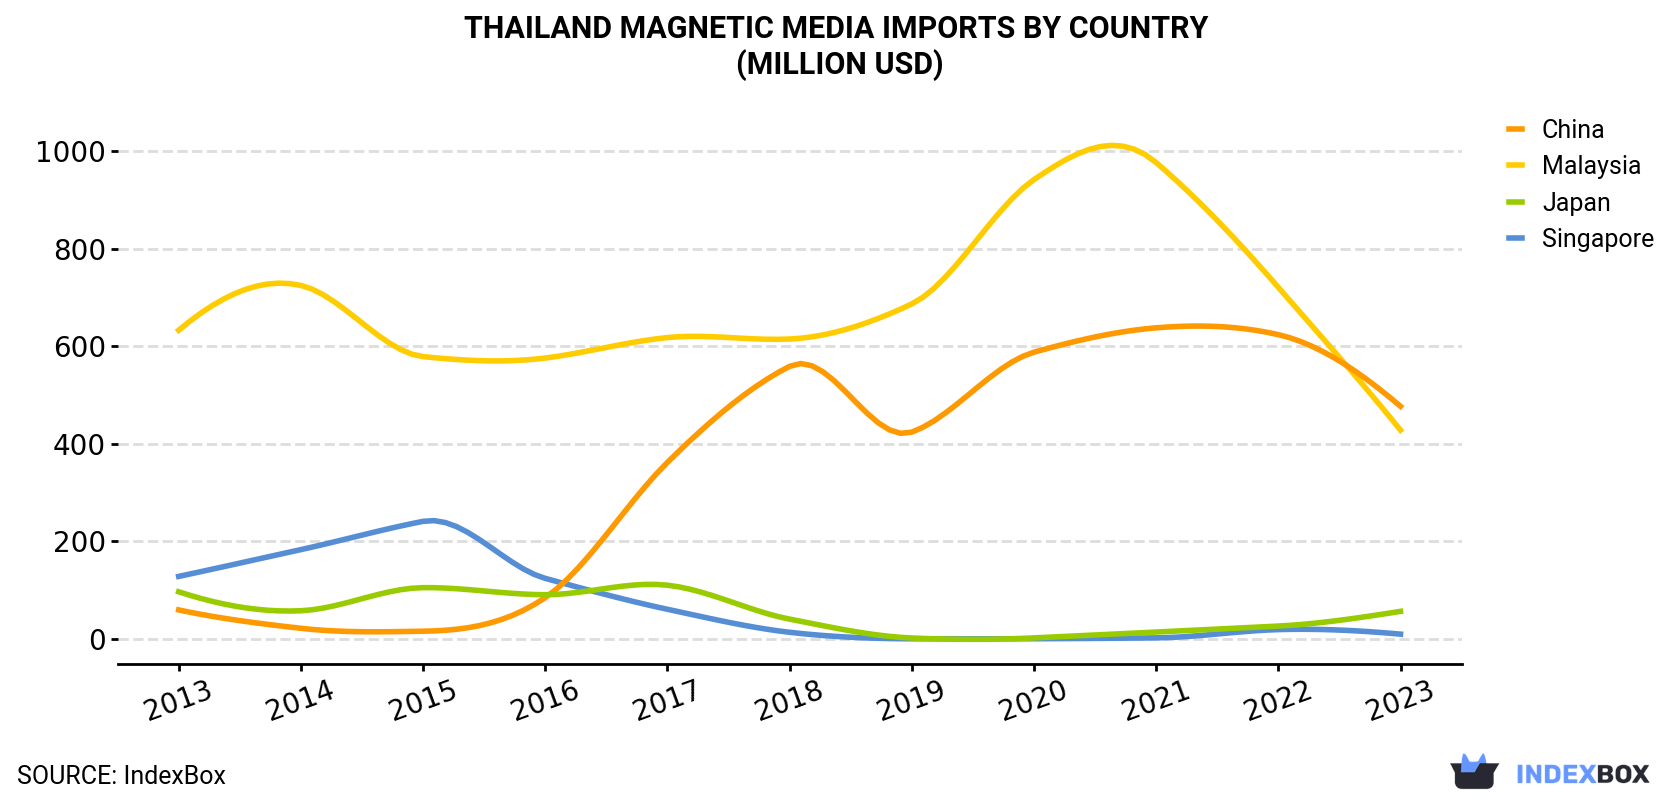 Thailand Magnetic Media Imports By Country (Million USD)